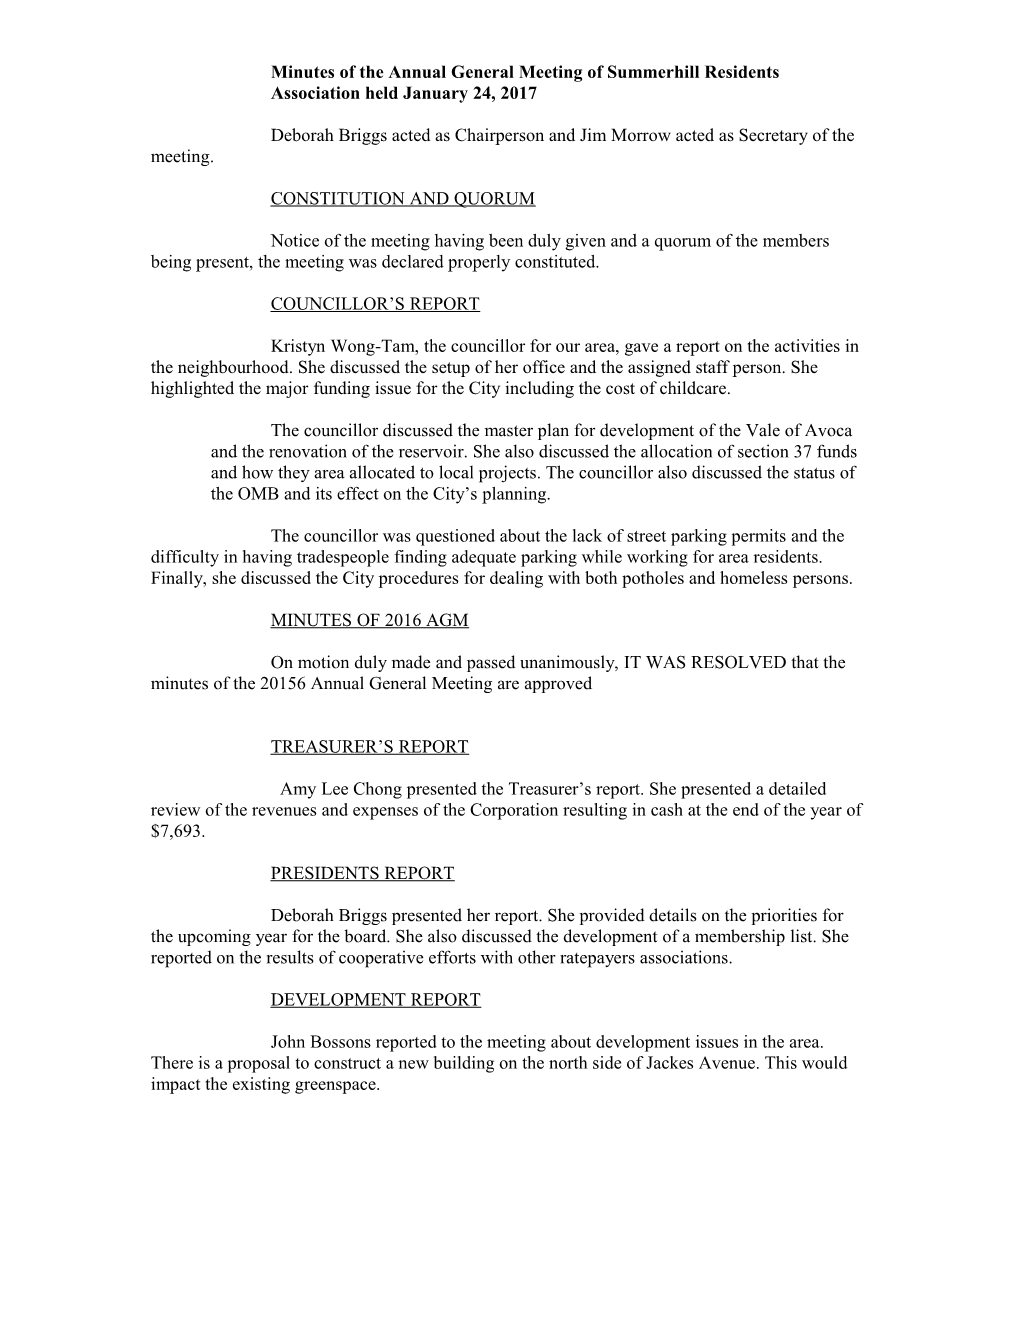 Minutes of a Meeting of the Board of Directors s1